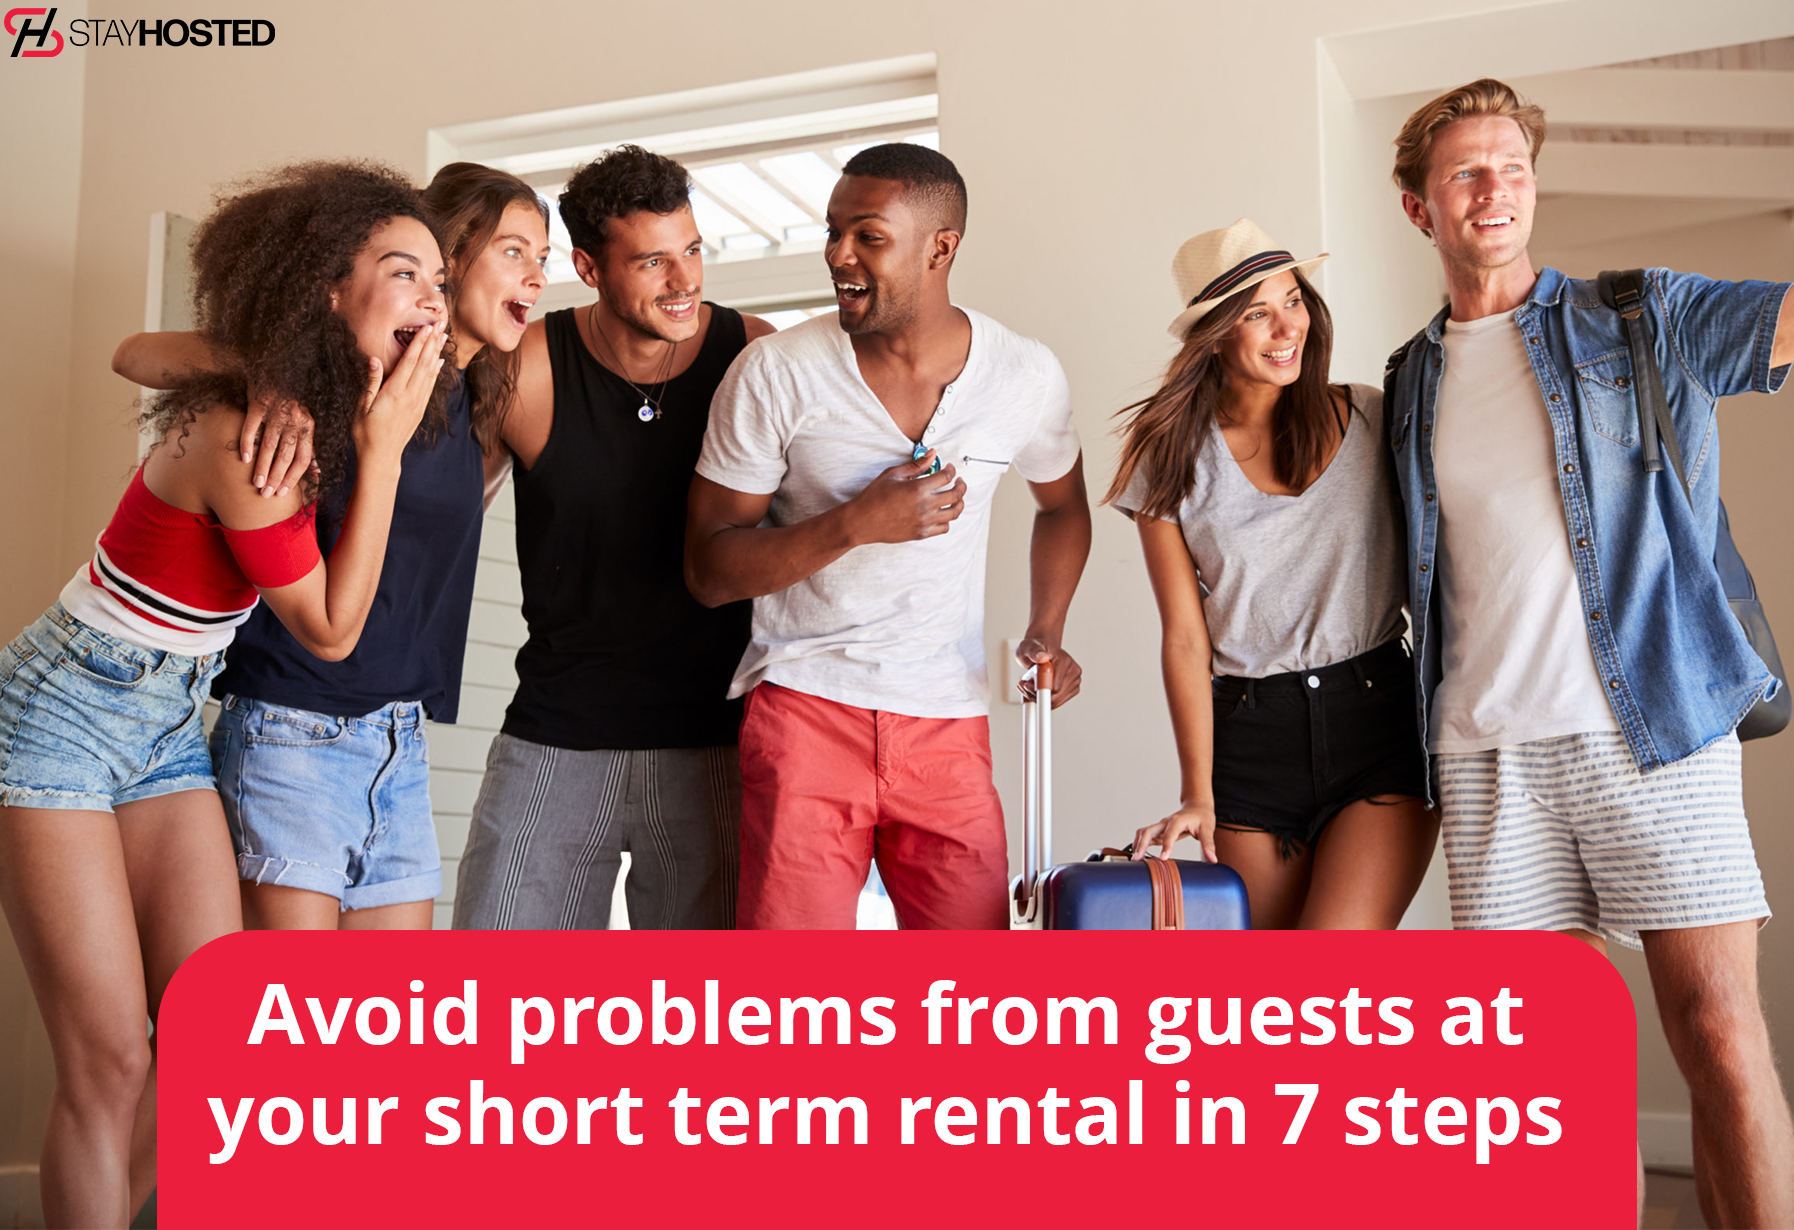 Avoid problems from guests at your short term rental/Airbnb